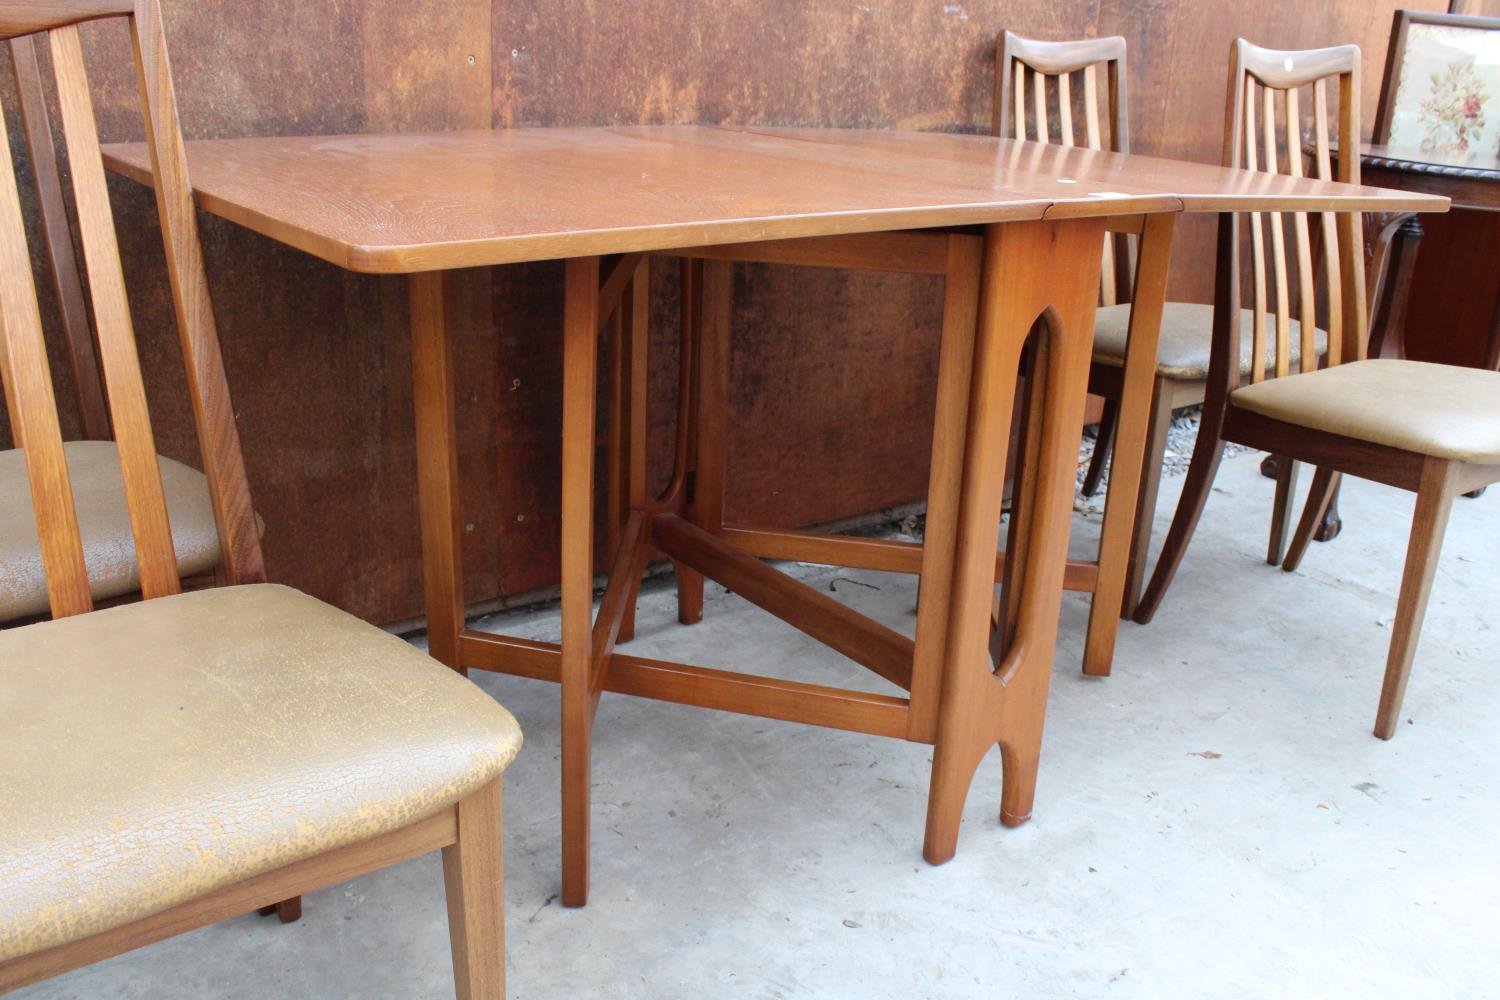 A RETRO TEAK DROP-LEAF DINING TABLE, 57" X 33" OPENED AND FOUR DINING CHAIRS - Image 2 of 4